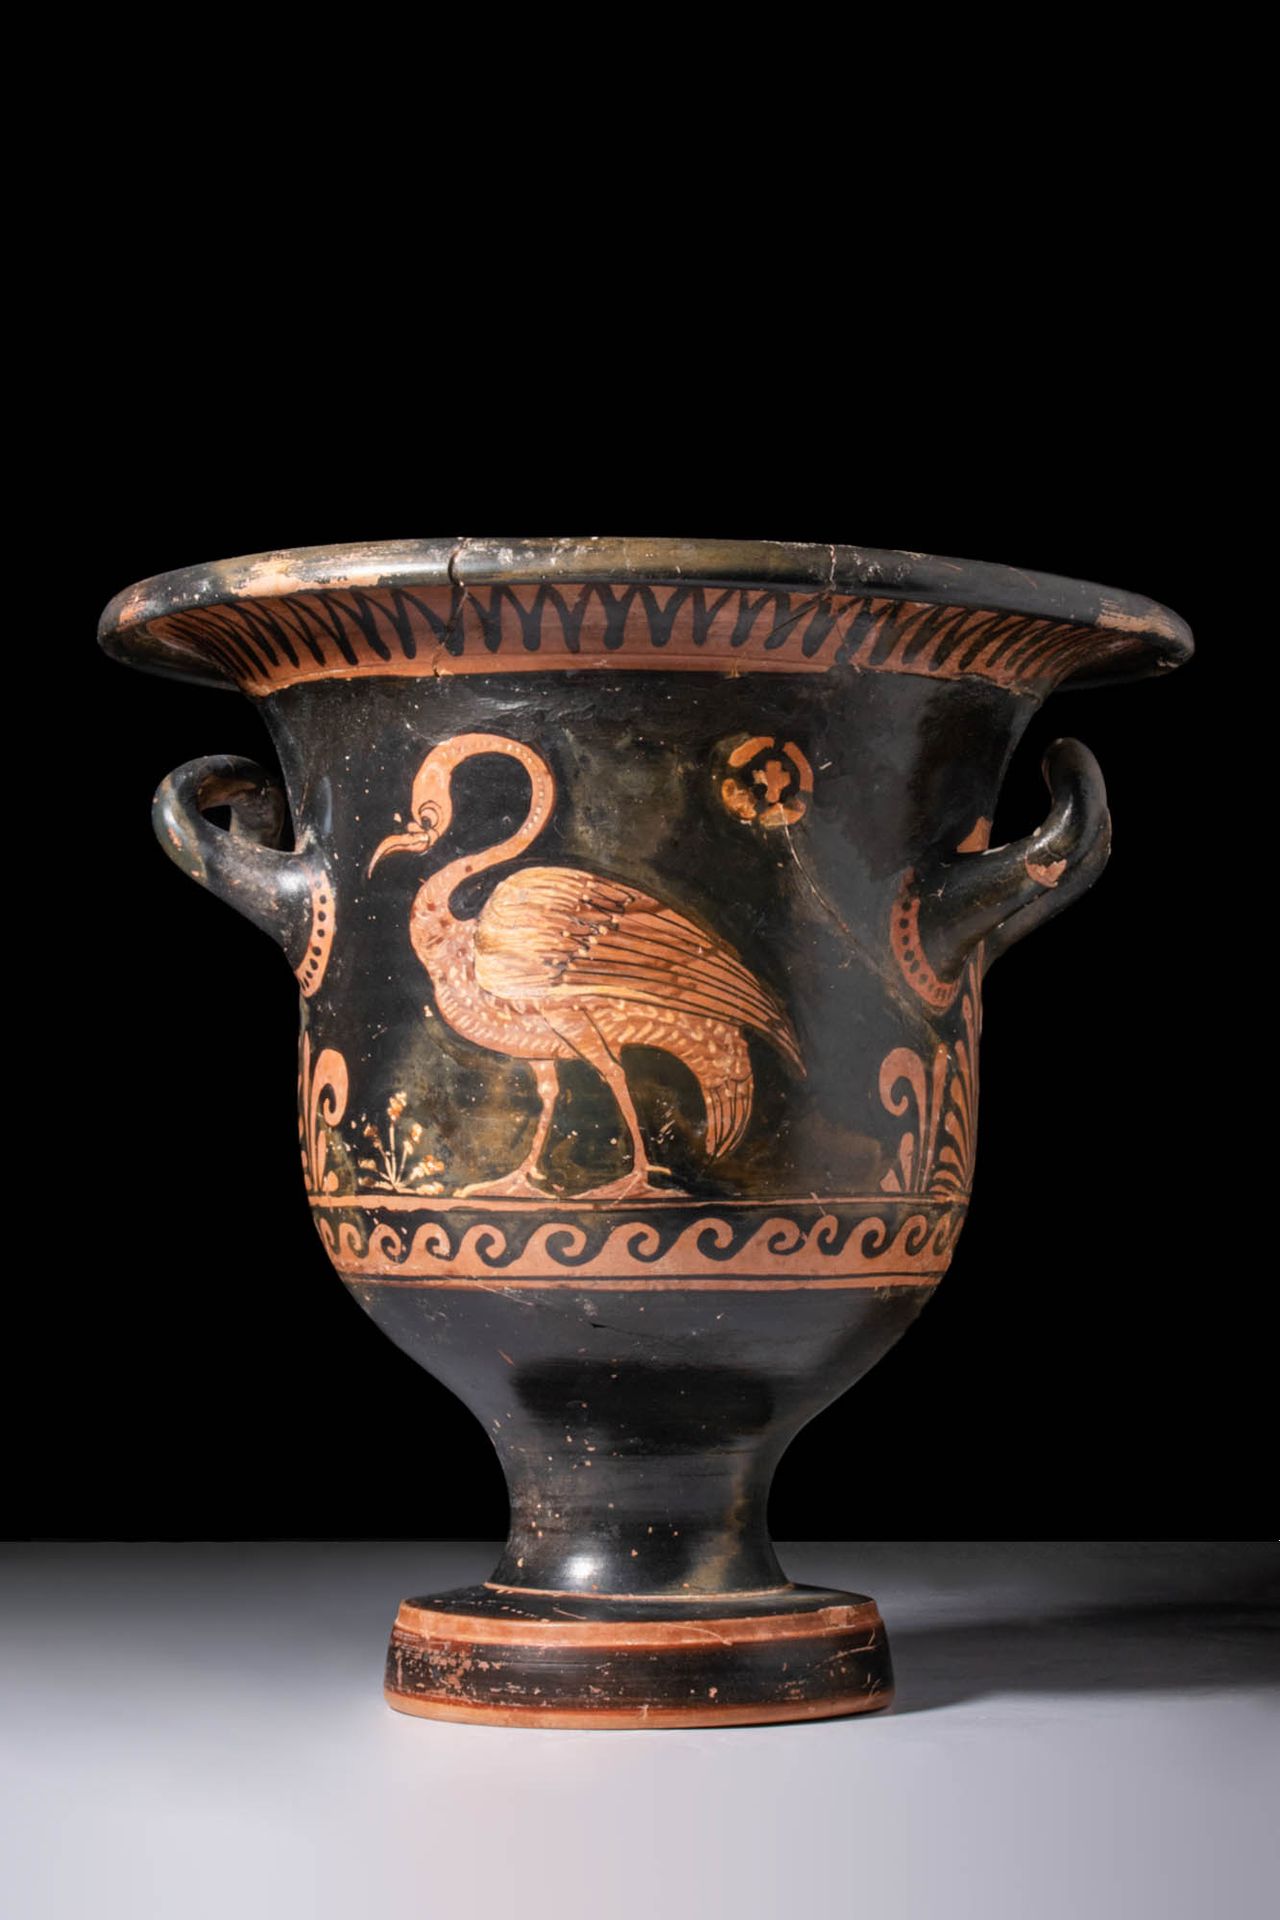 RARE GREEK APULIAN RED-FIGURE BELL KRATER WITH SWAN Ca. 340 - 320 V. CHR.
Ein ap&hellip;